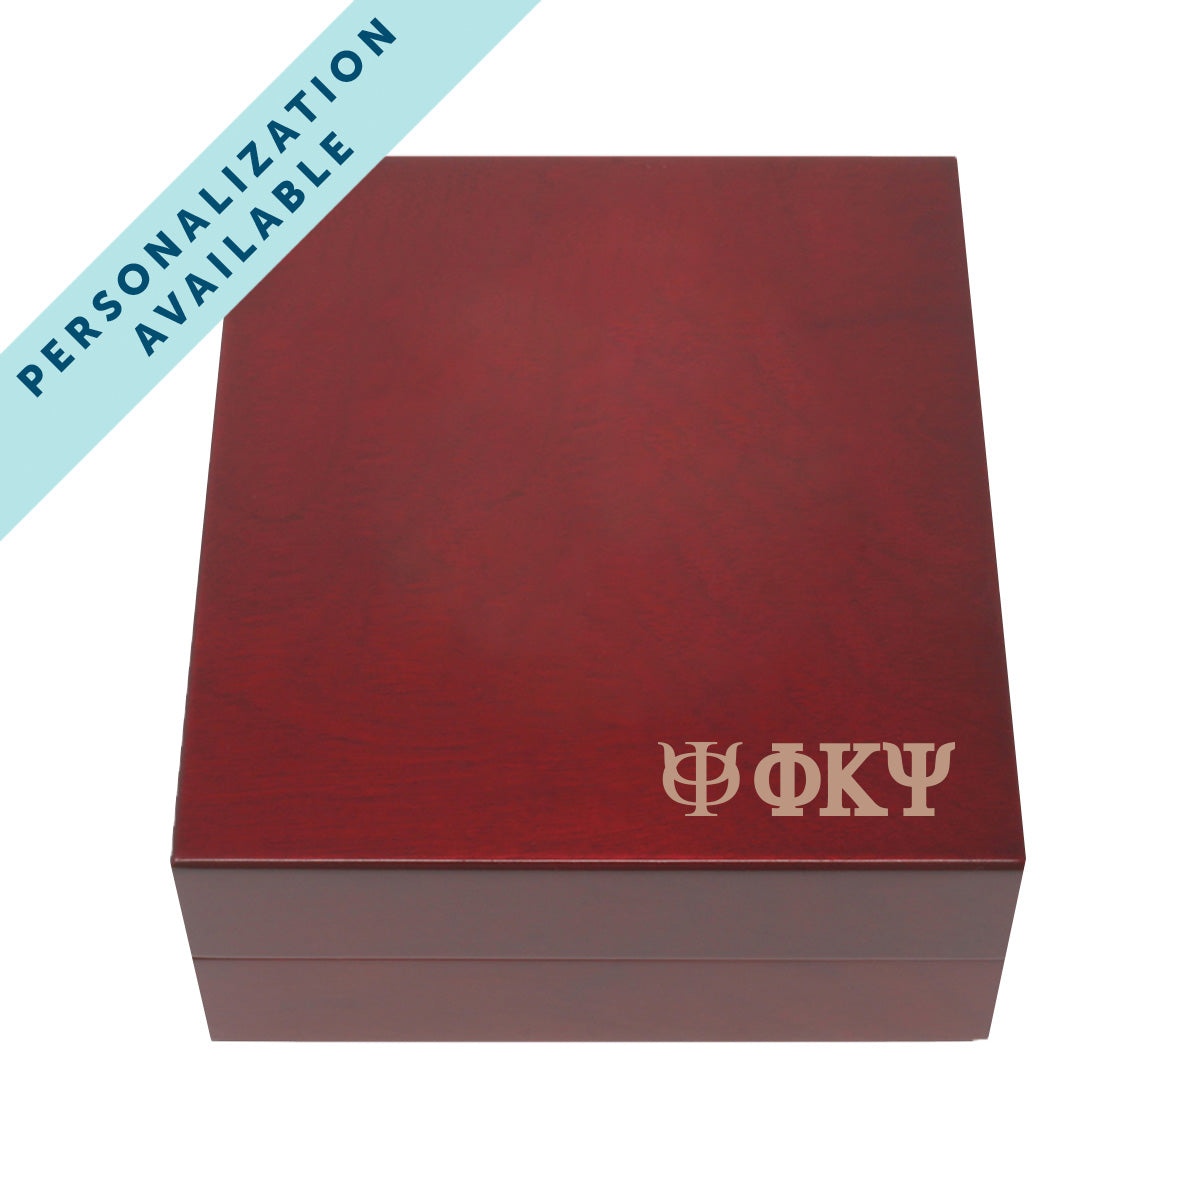 New! Phi Psi Fraternity Greek Letter Rosewood Box